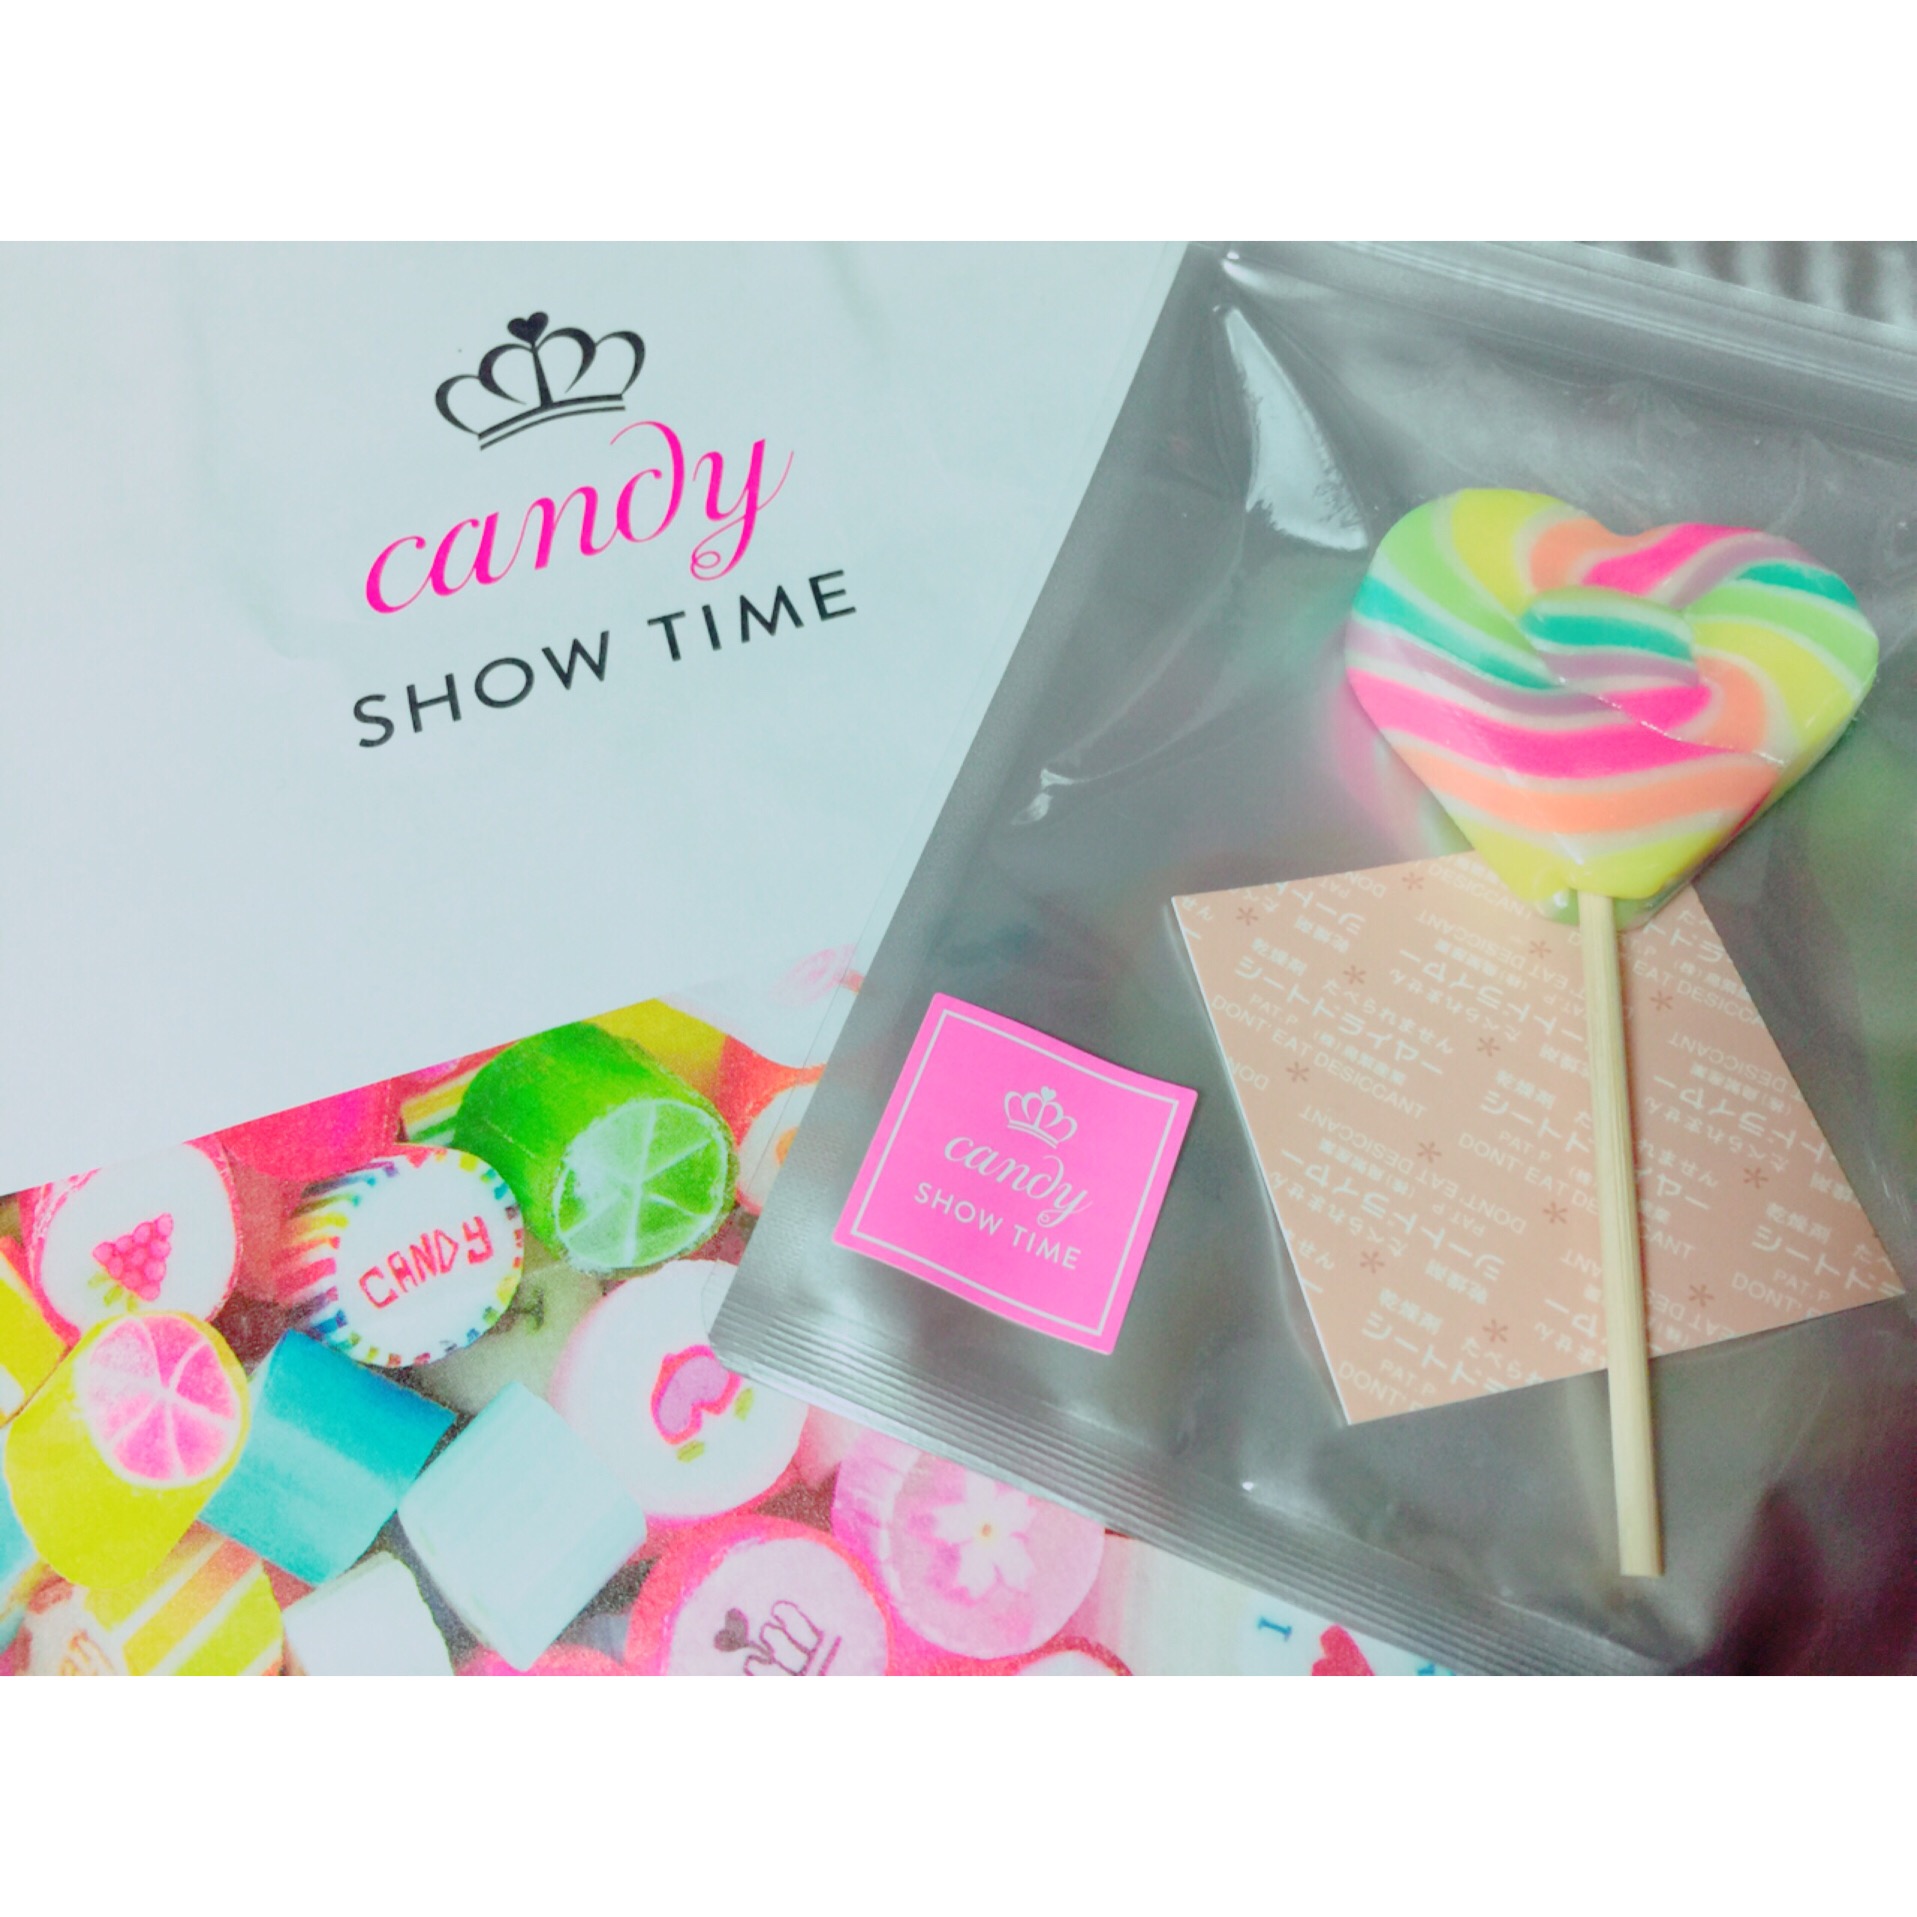 candy show time